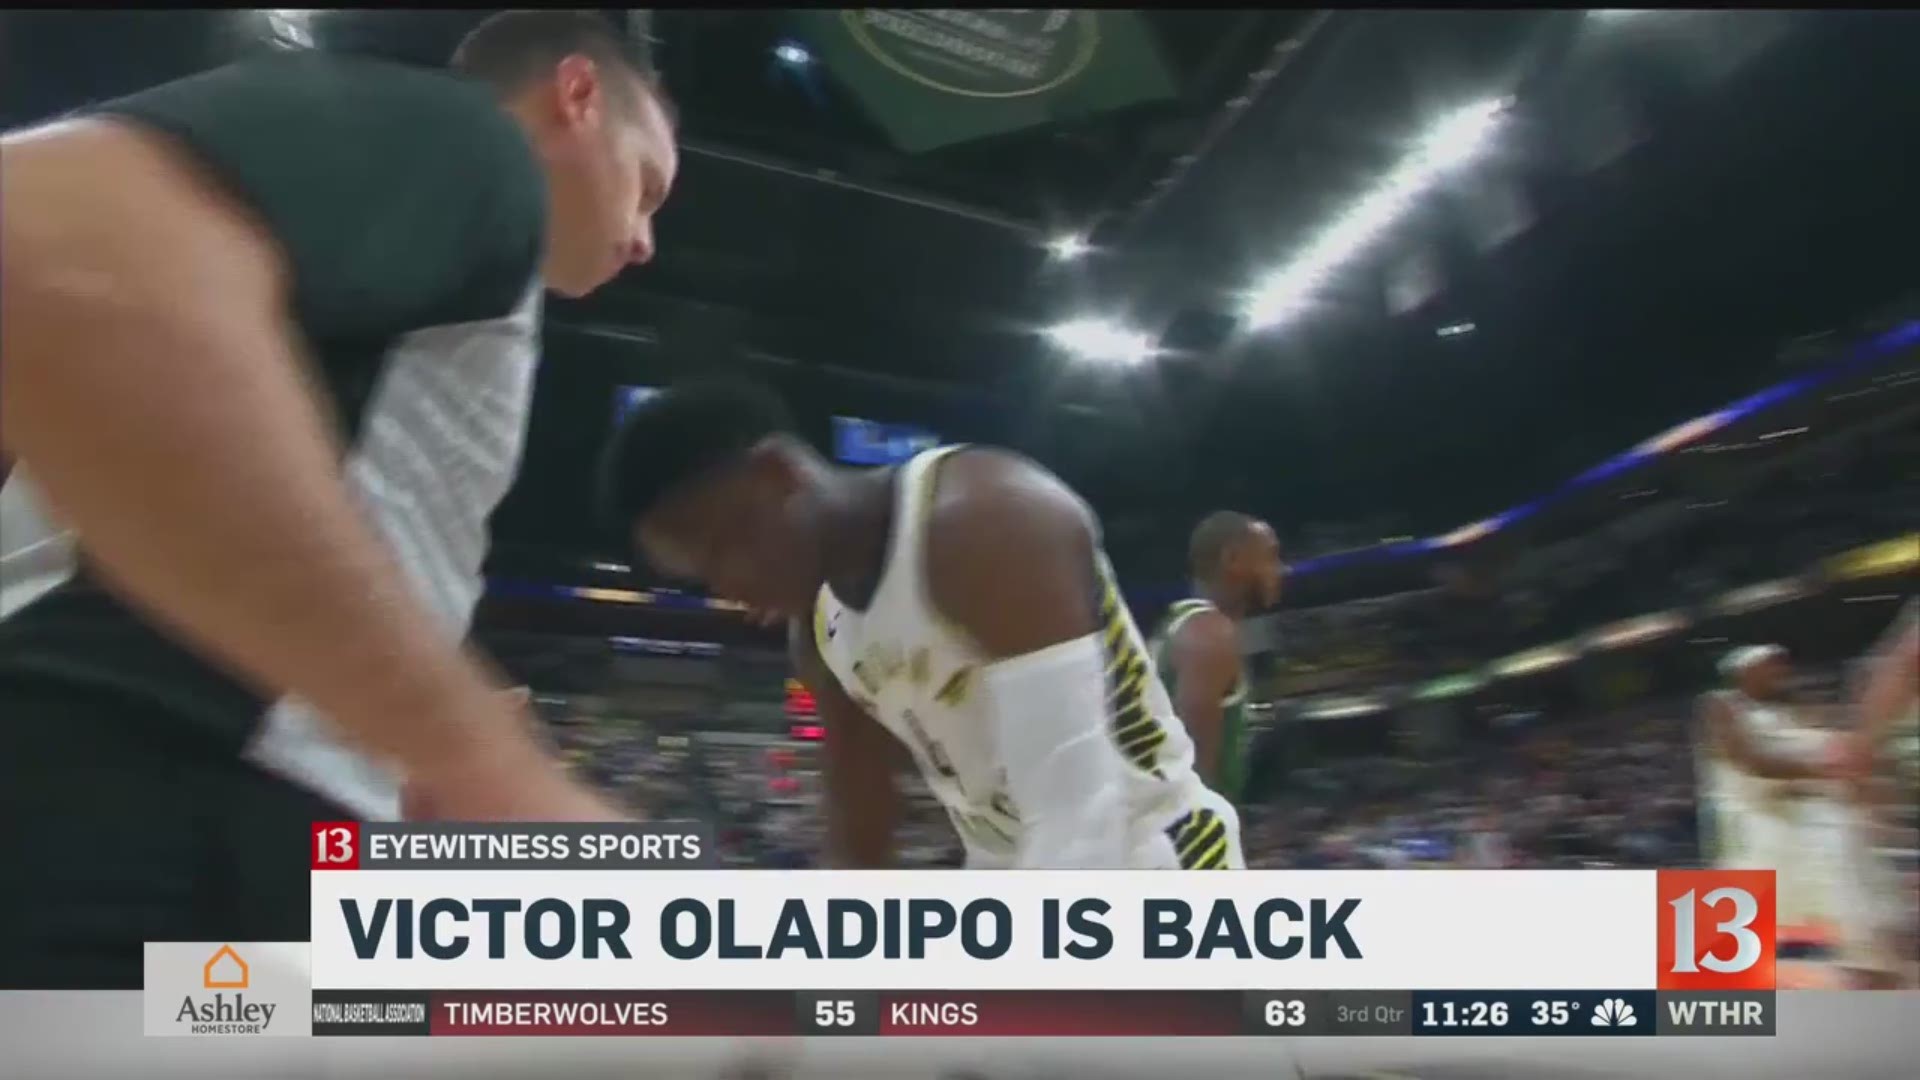 Victor Oladipo is back!